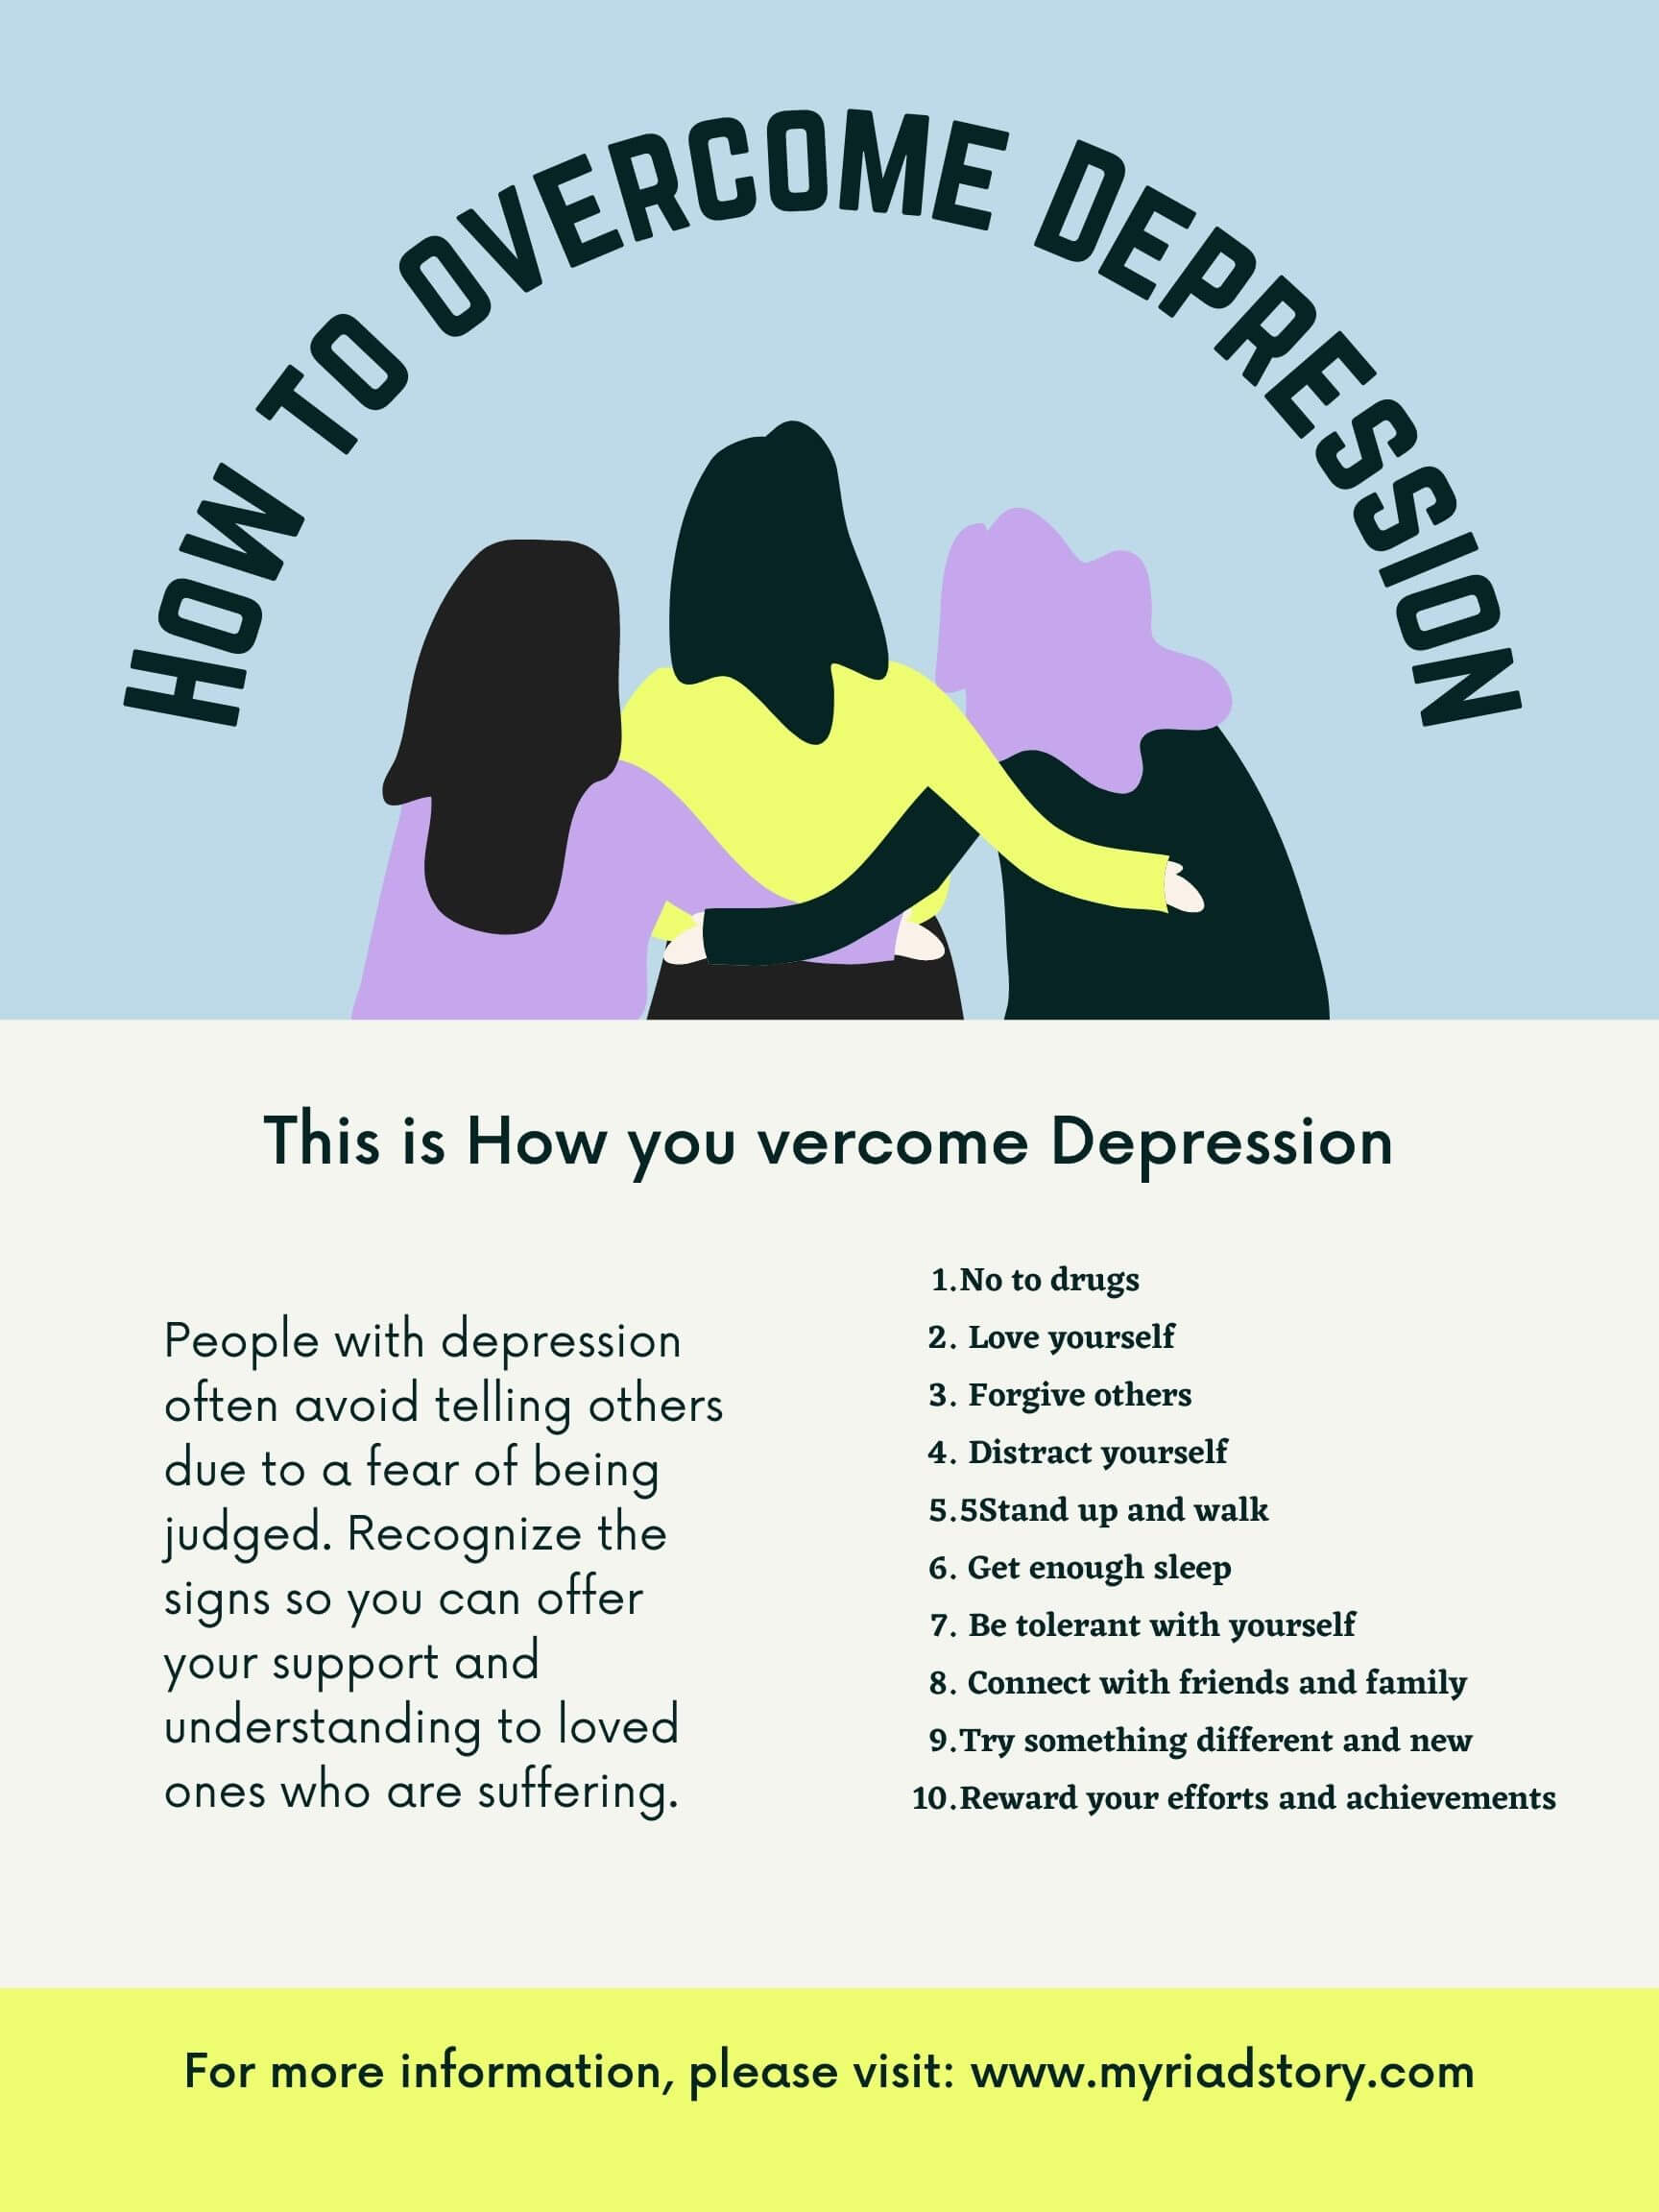 10 Ways to overcome Frustration and Depression